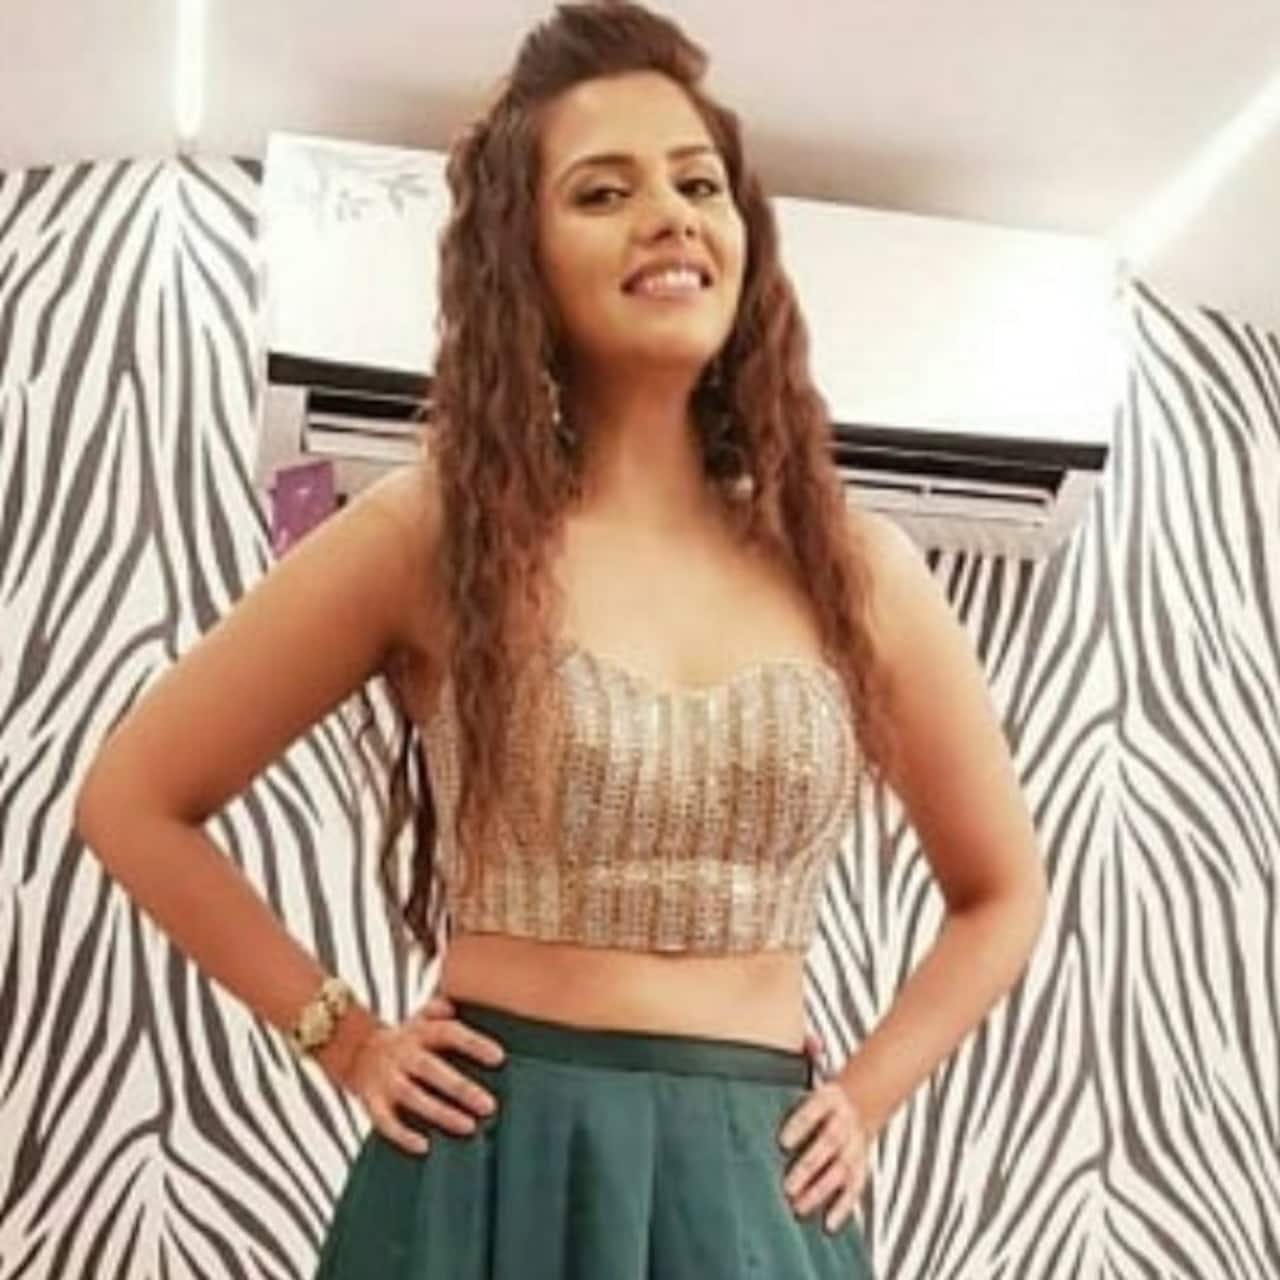 Bigg Boss 13: Daljeet Kaur reveals boys have to think 10 times before coming to her place till date - here's why